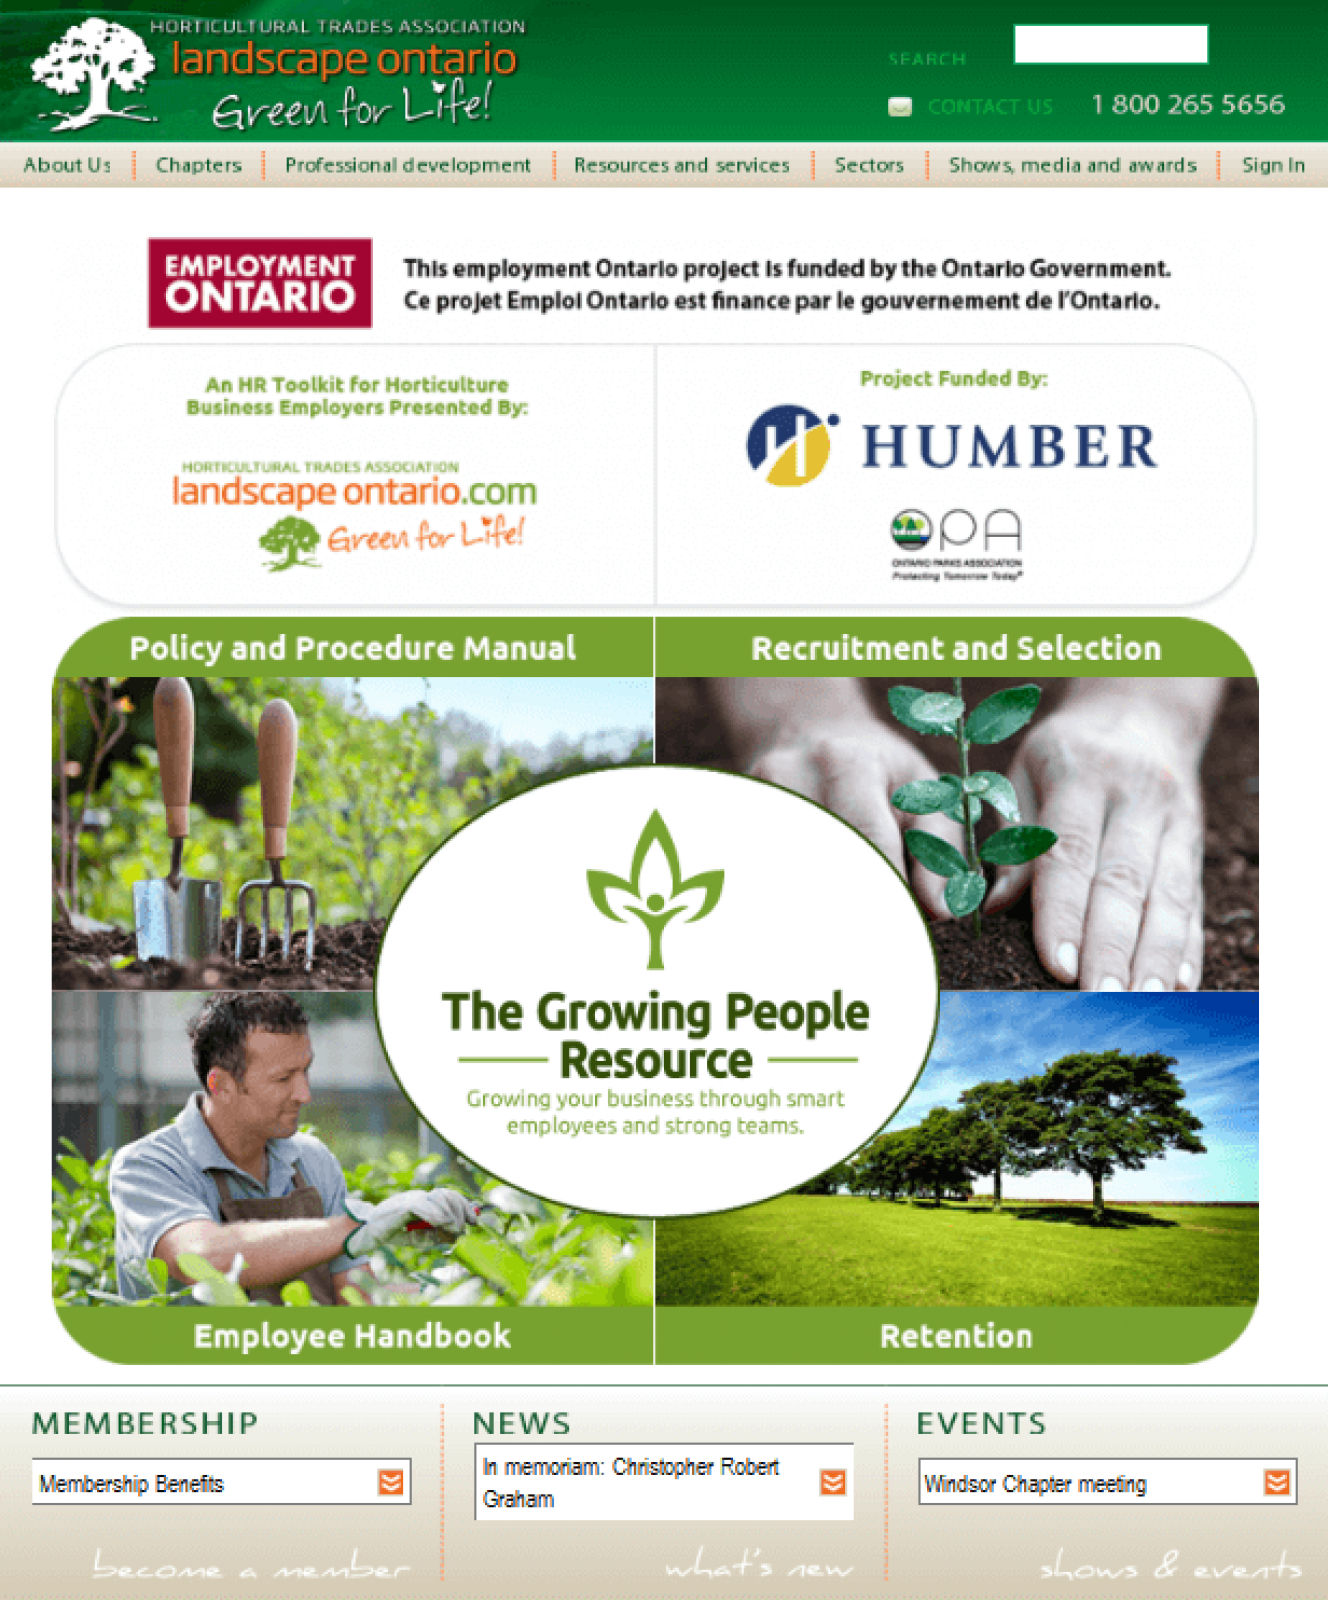 Find help with your staffing challenges at www.horttrades.com/HRToolkit.